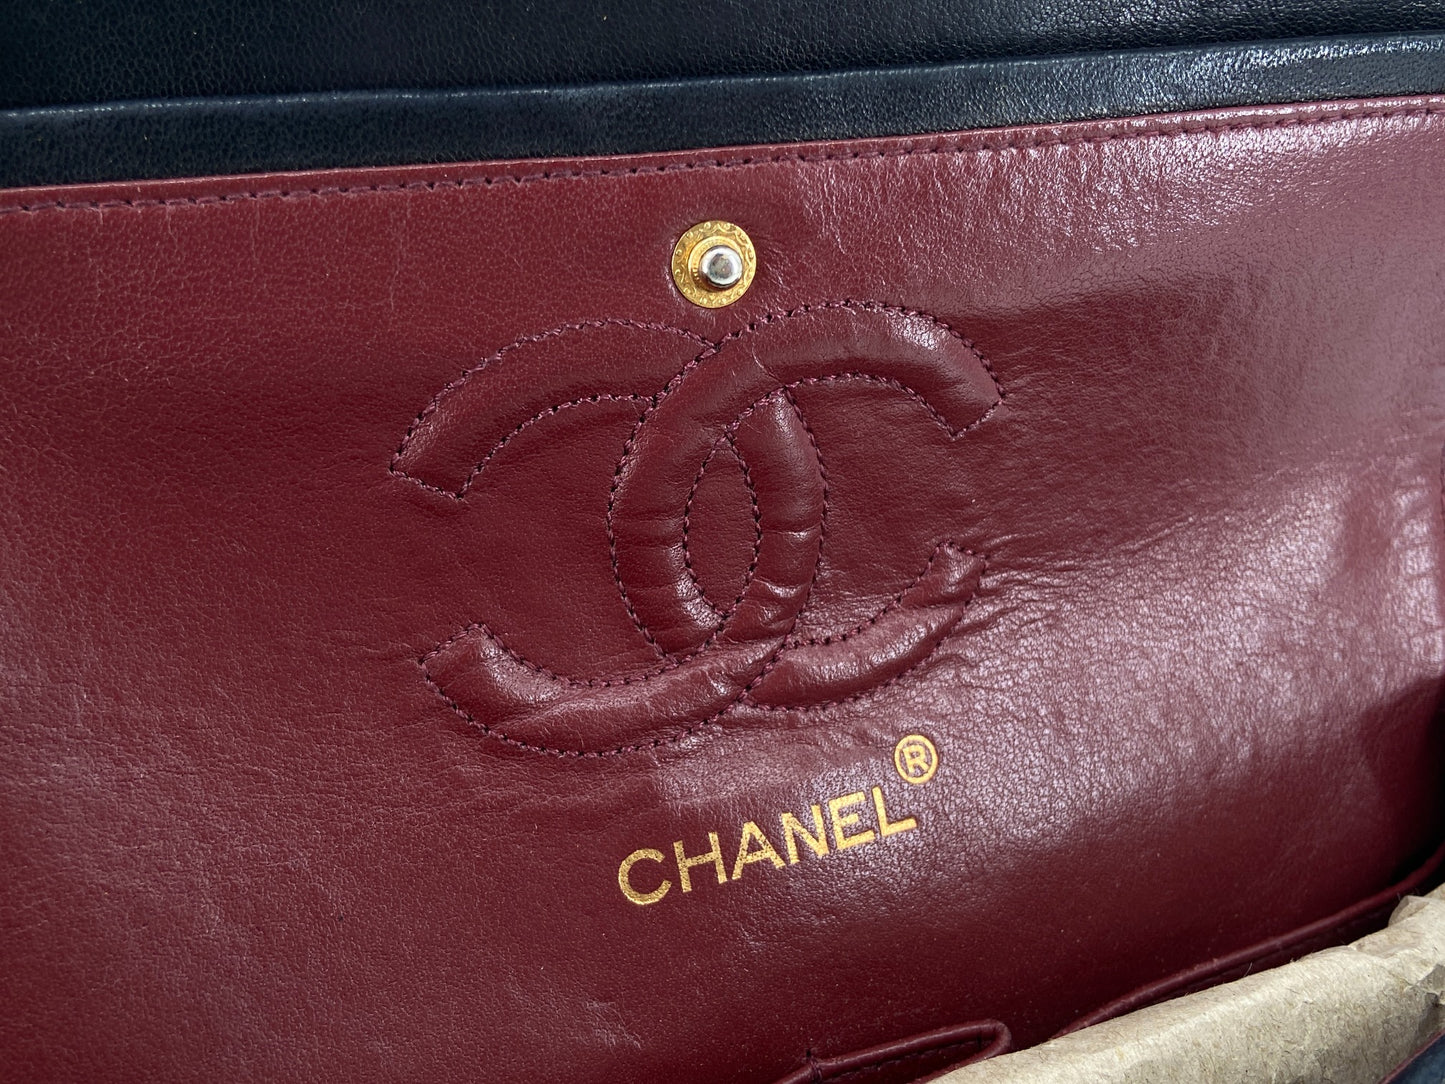 Chanel Timeless / Classique Double Flap Bag Black Lambskin Quilted Matelasse Leather